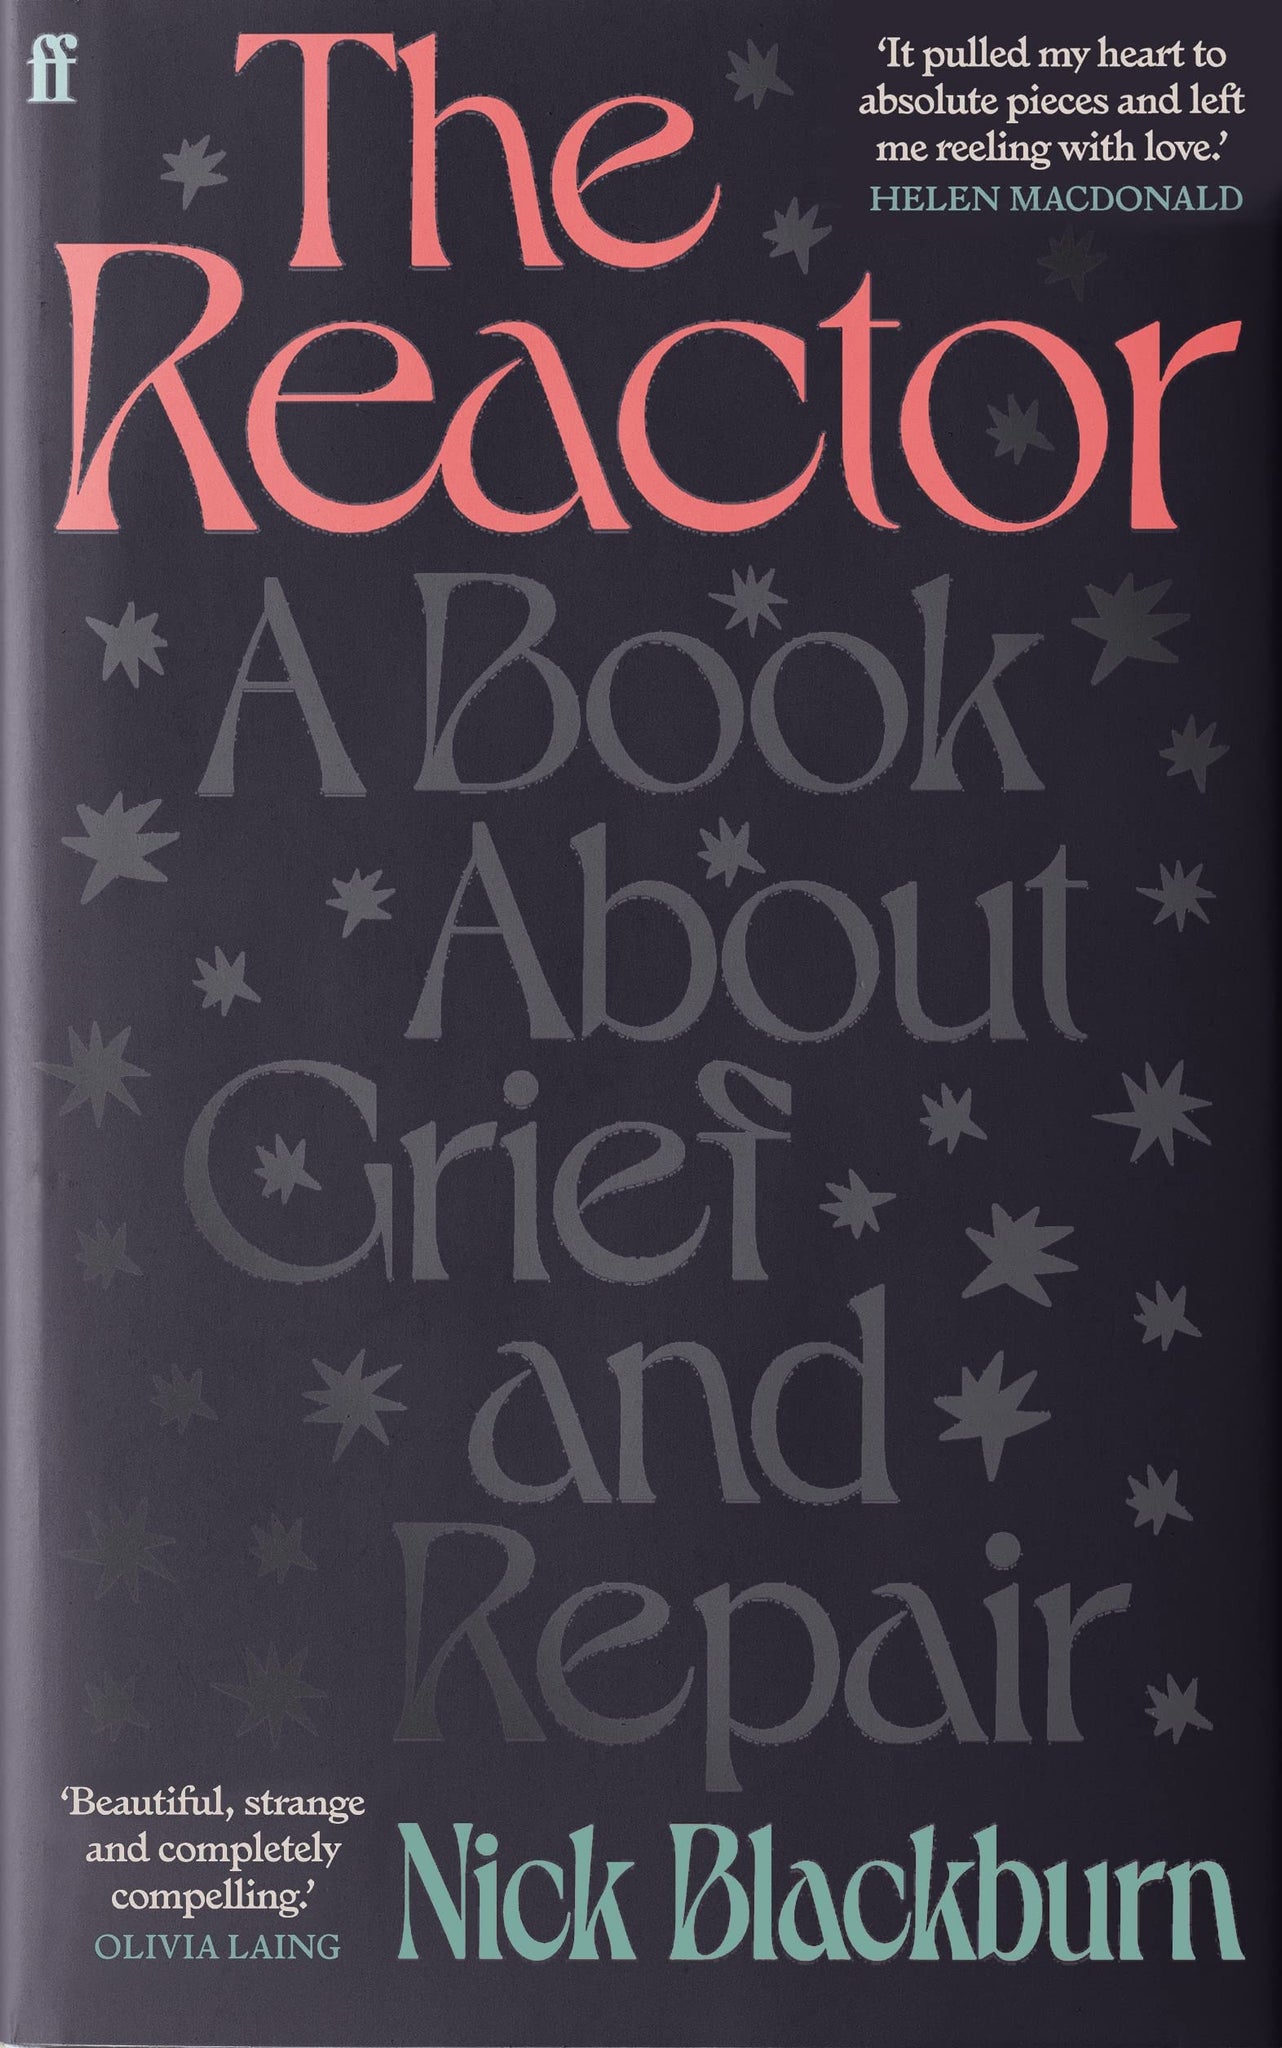 The Reactor: A Book about Grief and Repair